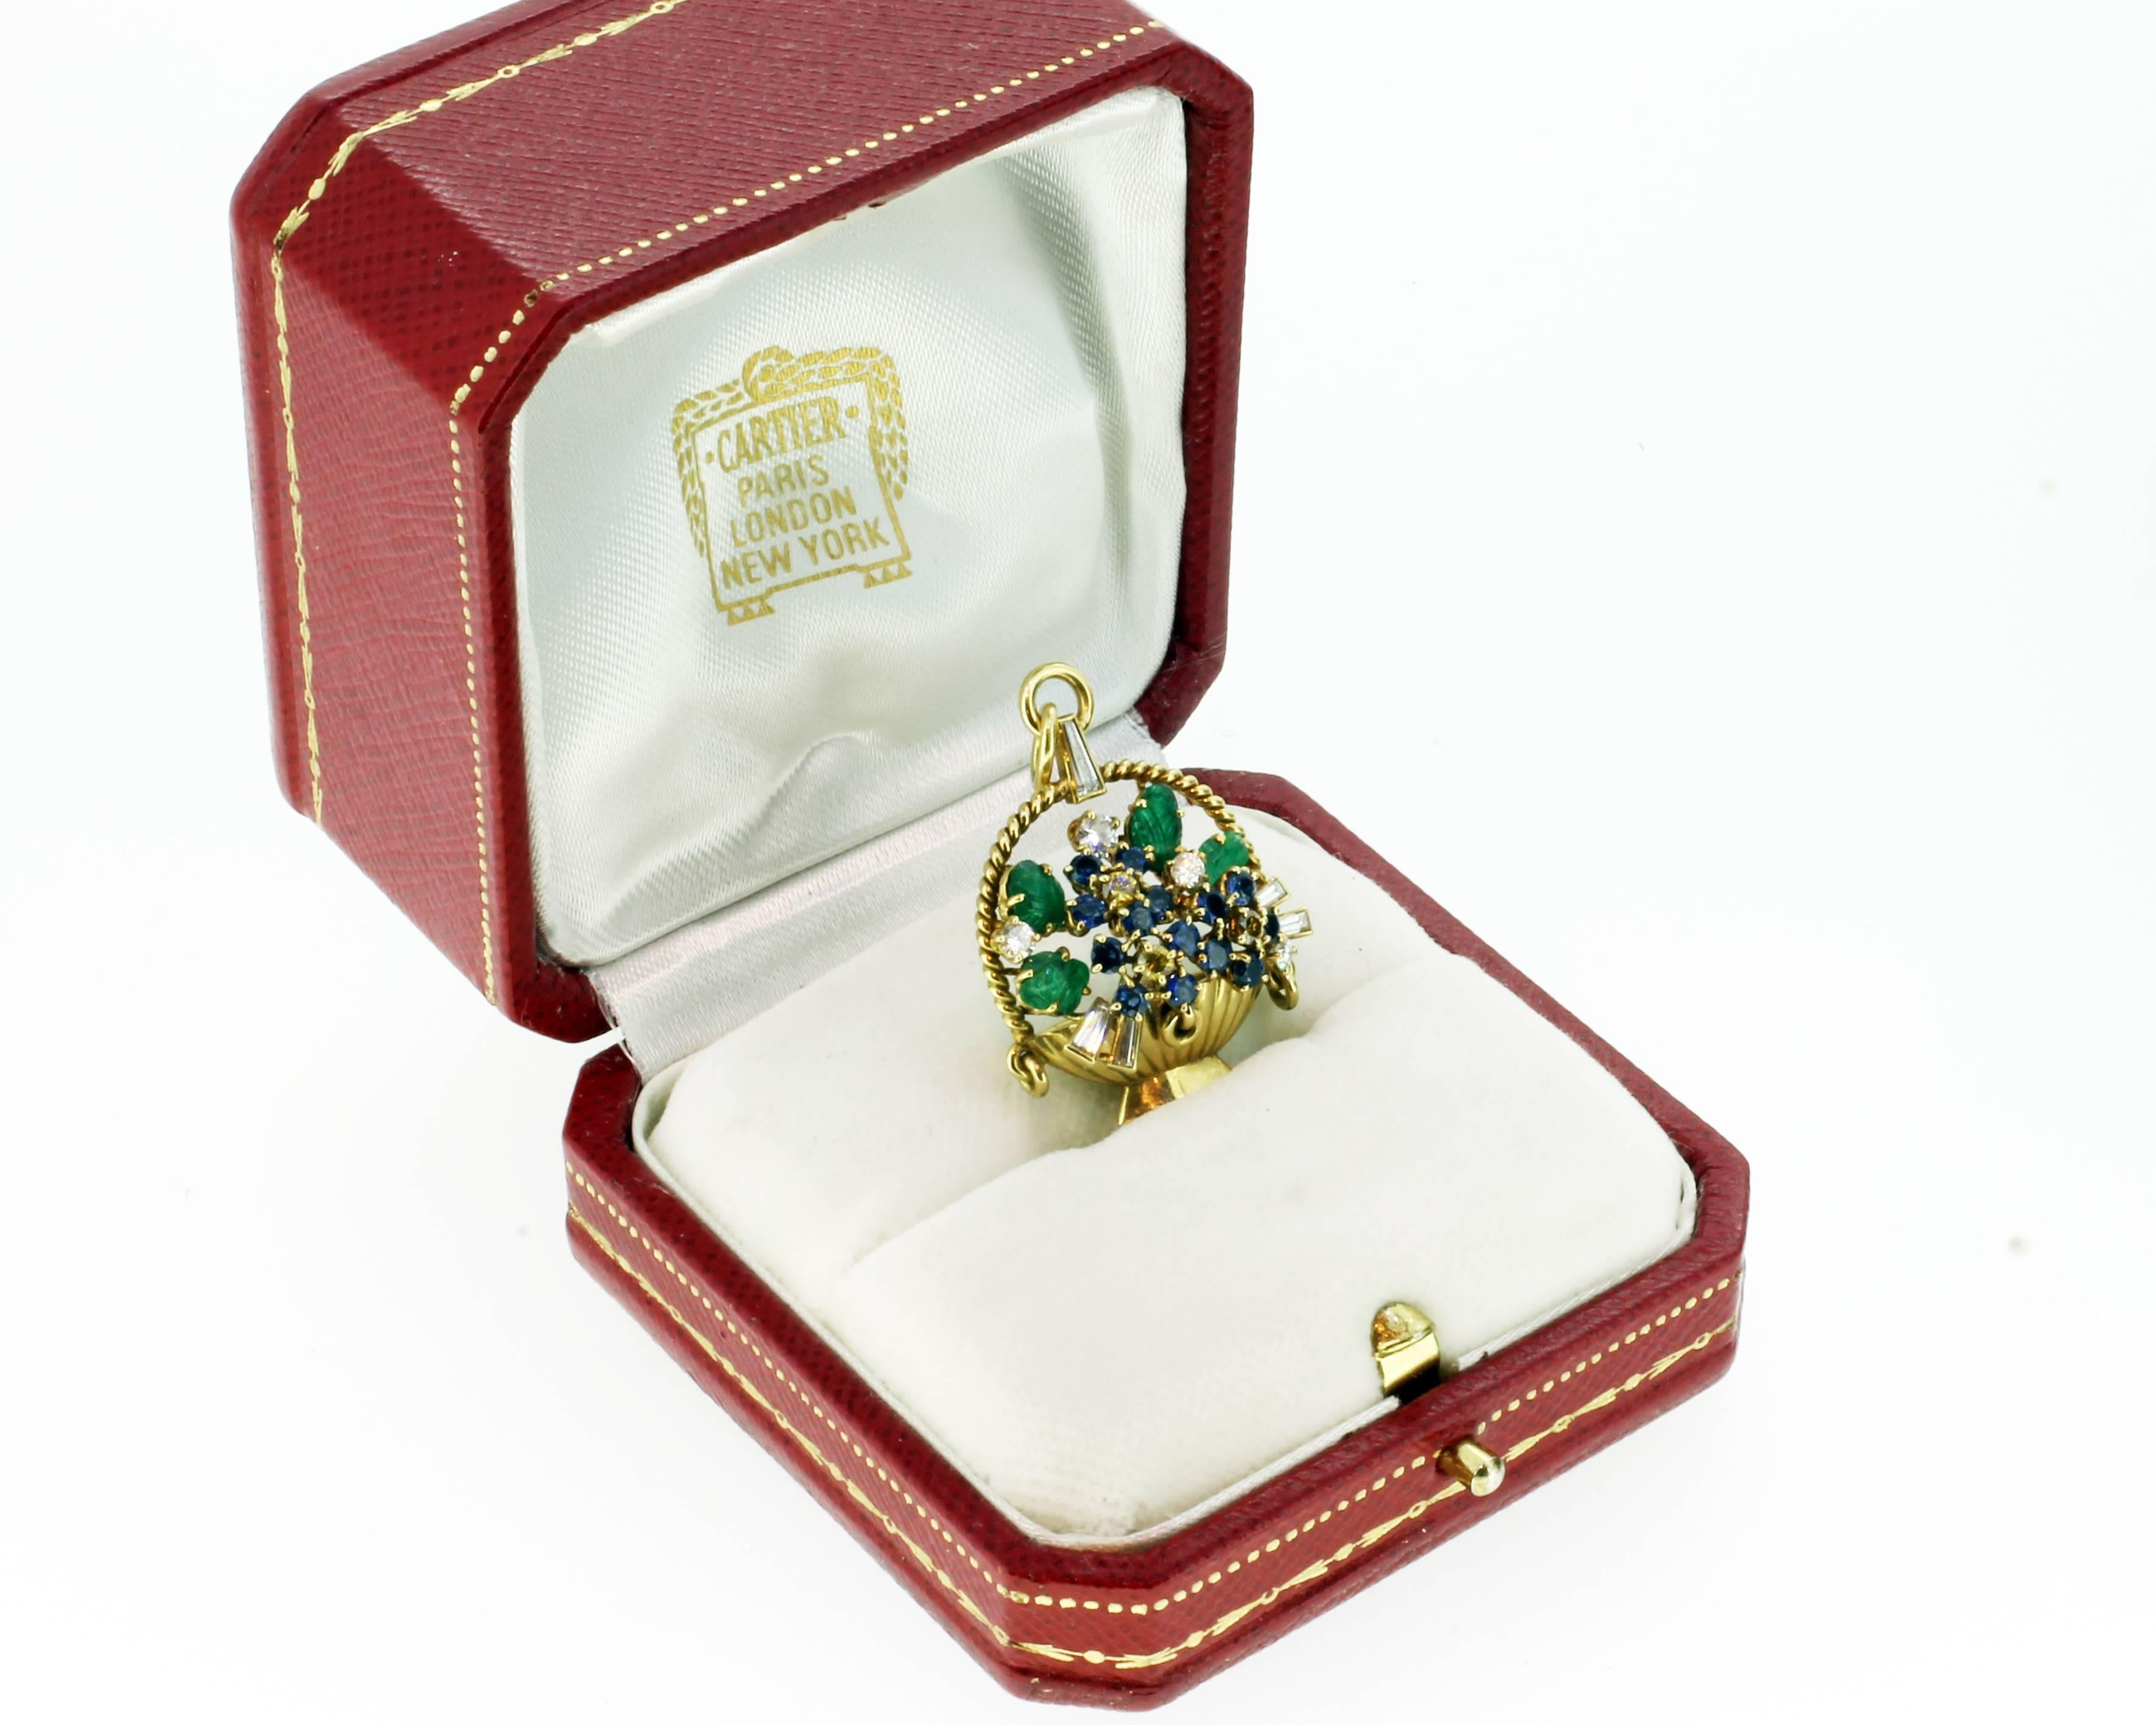 1976 Cariter 'Tutti Frutti' basket moutned in 18ct yellow gold. London. 1976
The central carved emeralds, sapphires, diamonds and yellow sapphires realistically modelled as flowers within a basket brooch. Signed Cartier London and marked with the